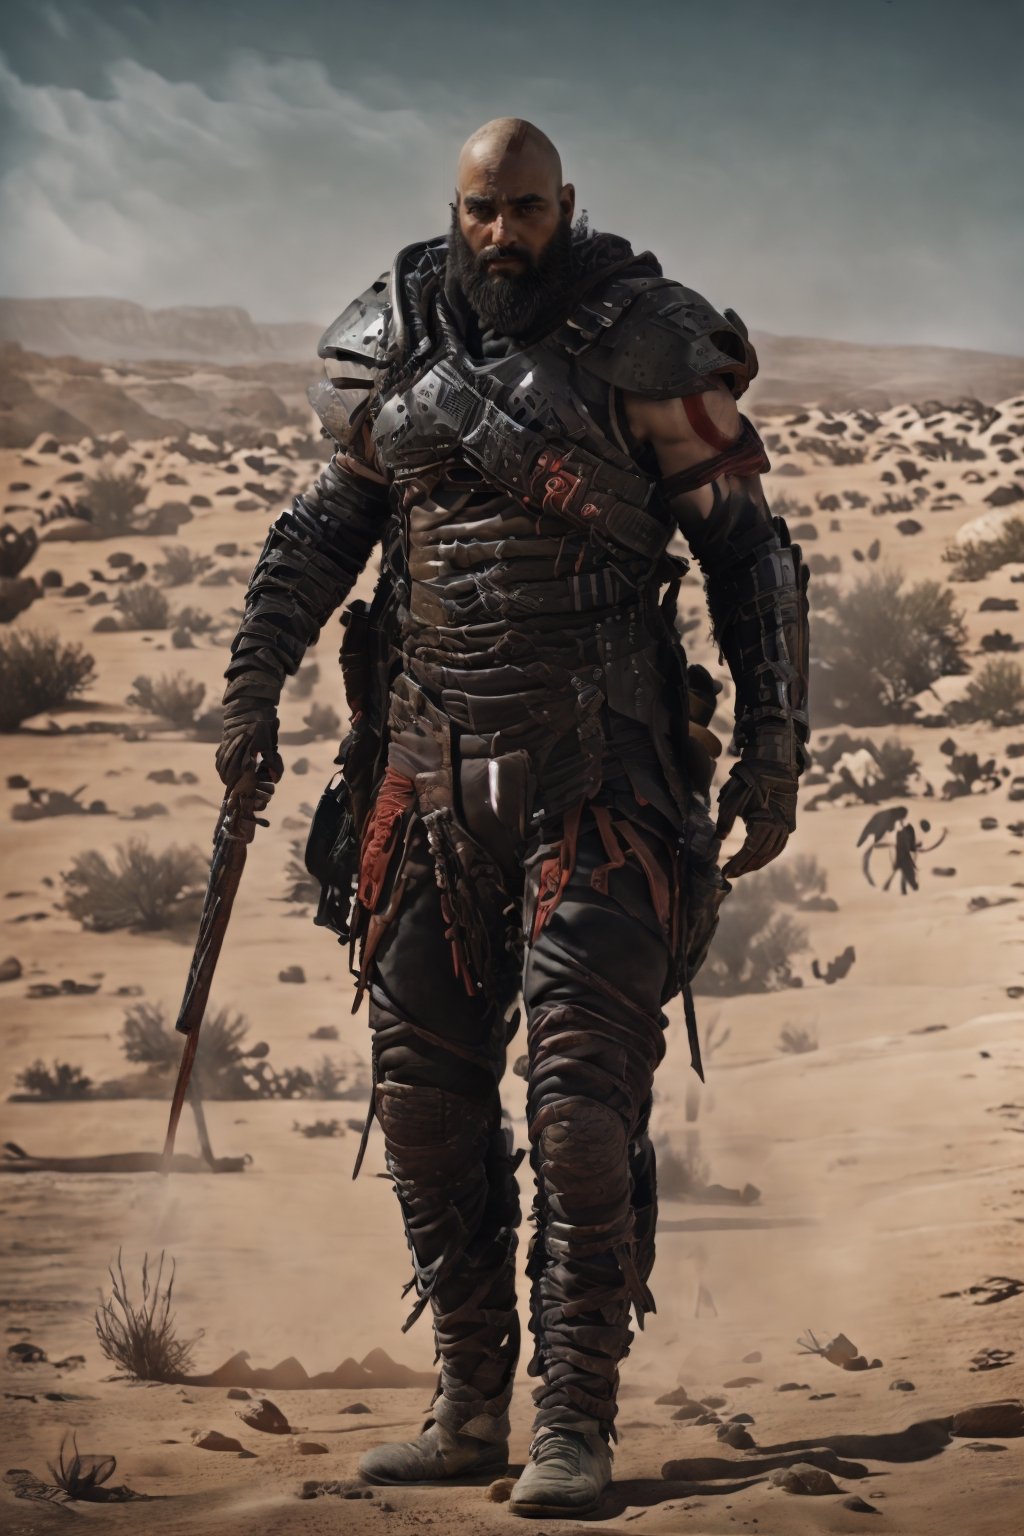 A male US special Solider, wearing full body armor suit, Dark and red colour uniform highly upgraded wepons ,super uniform,looking so good,full body,basic_background looks like in a desert ,war time,
,realism,realistic,portrait,Des3rt4rmor,F-22,westworld,kratosGOW_soul3142